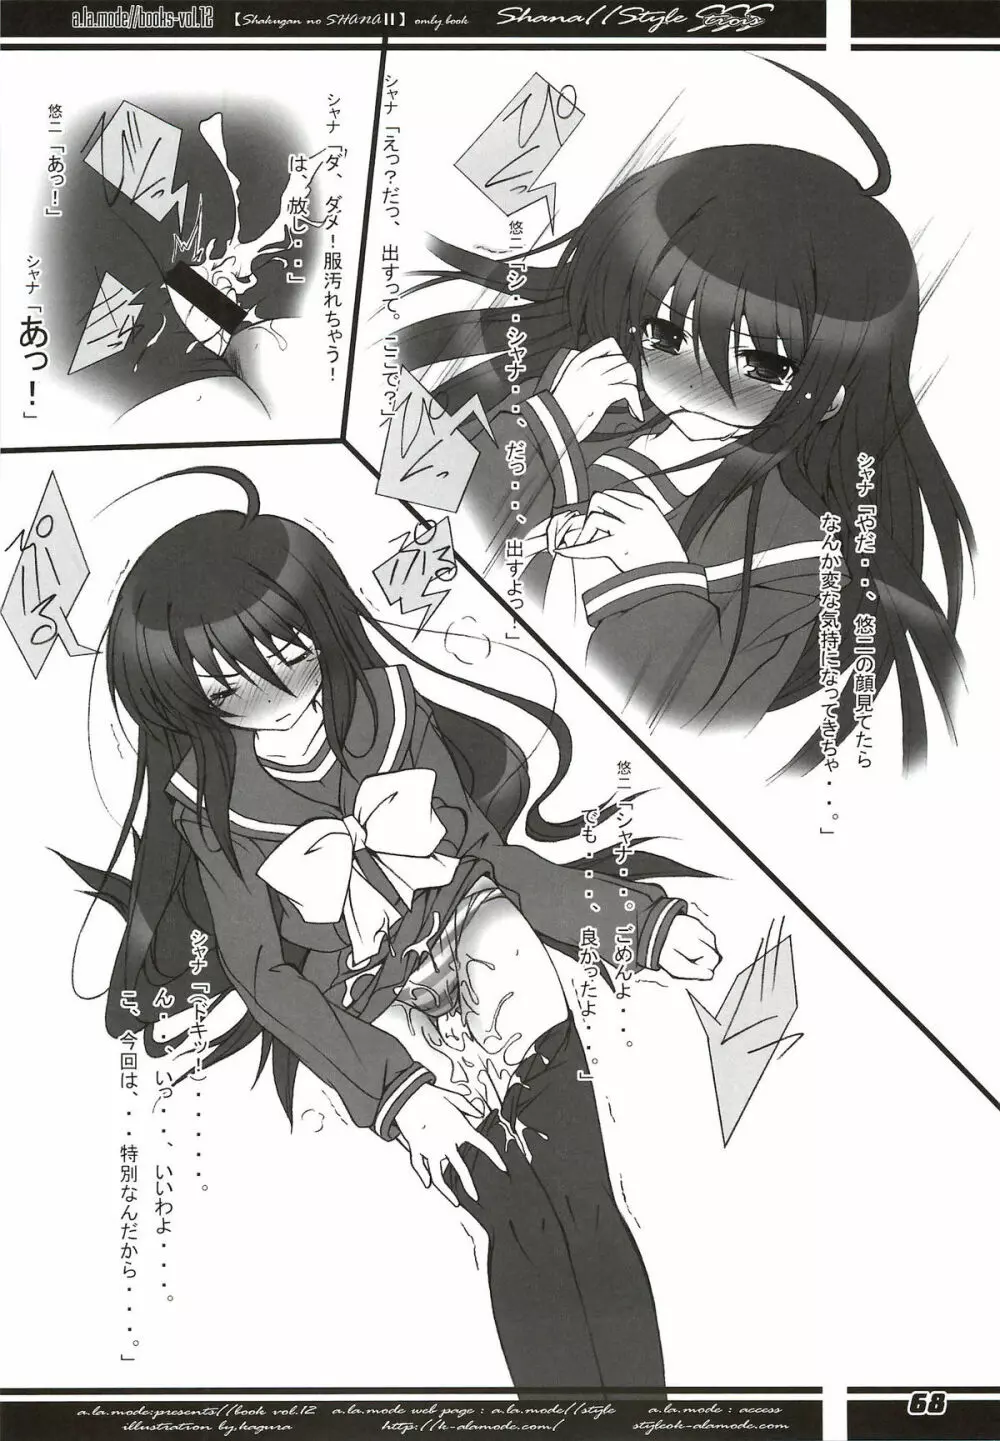 La Collection -Shana／／Style- Page.68